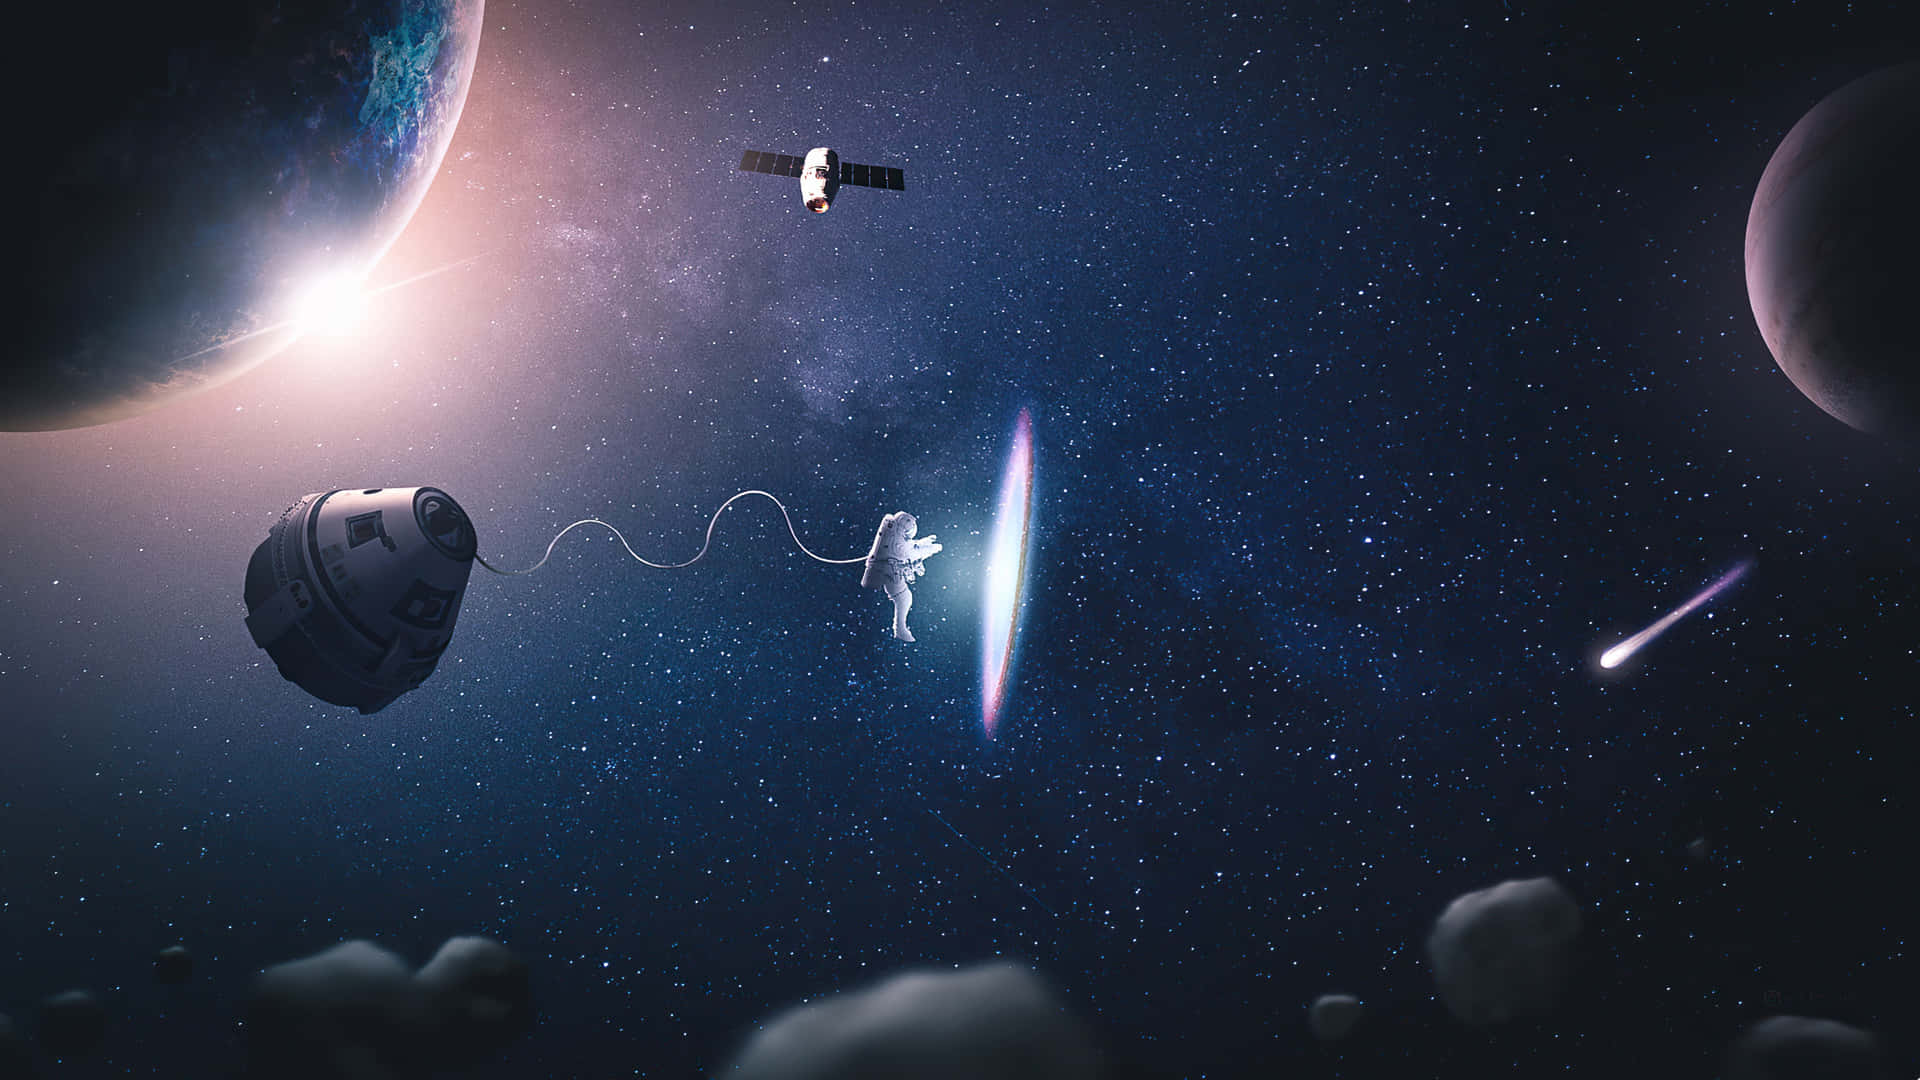 Astronaut_ Tethered_to_ Spacecraft_in_ Cosmos.jpg Wallpaper